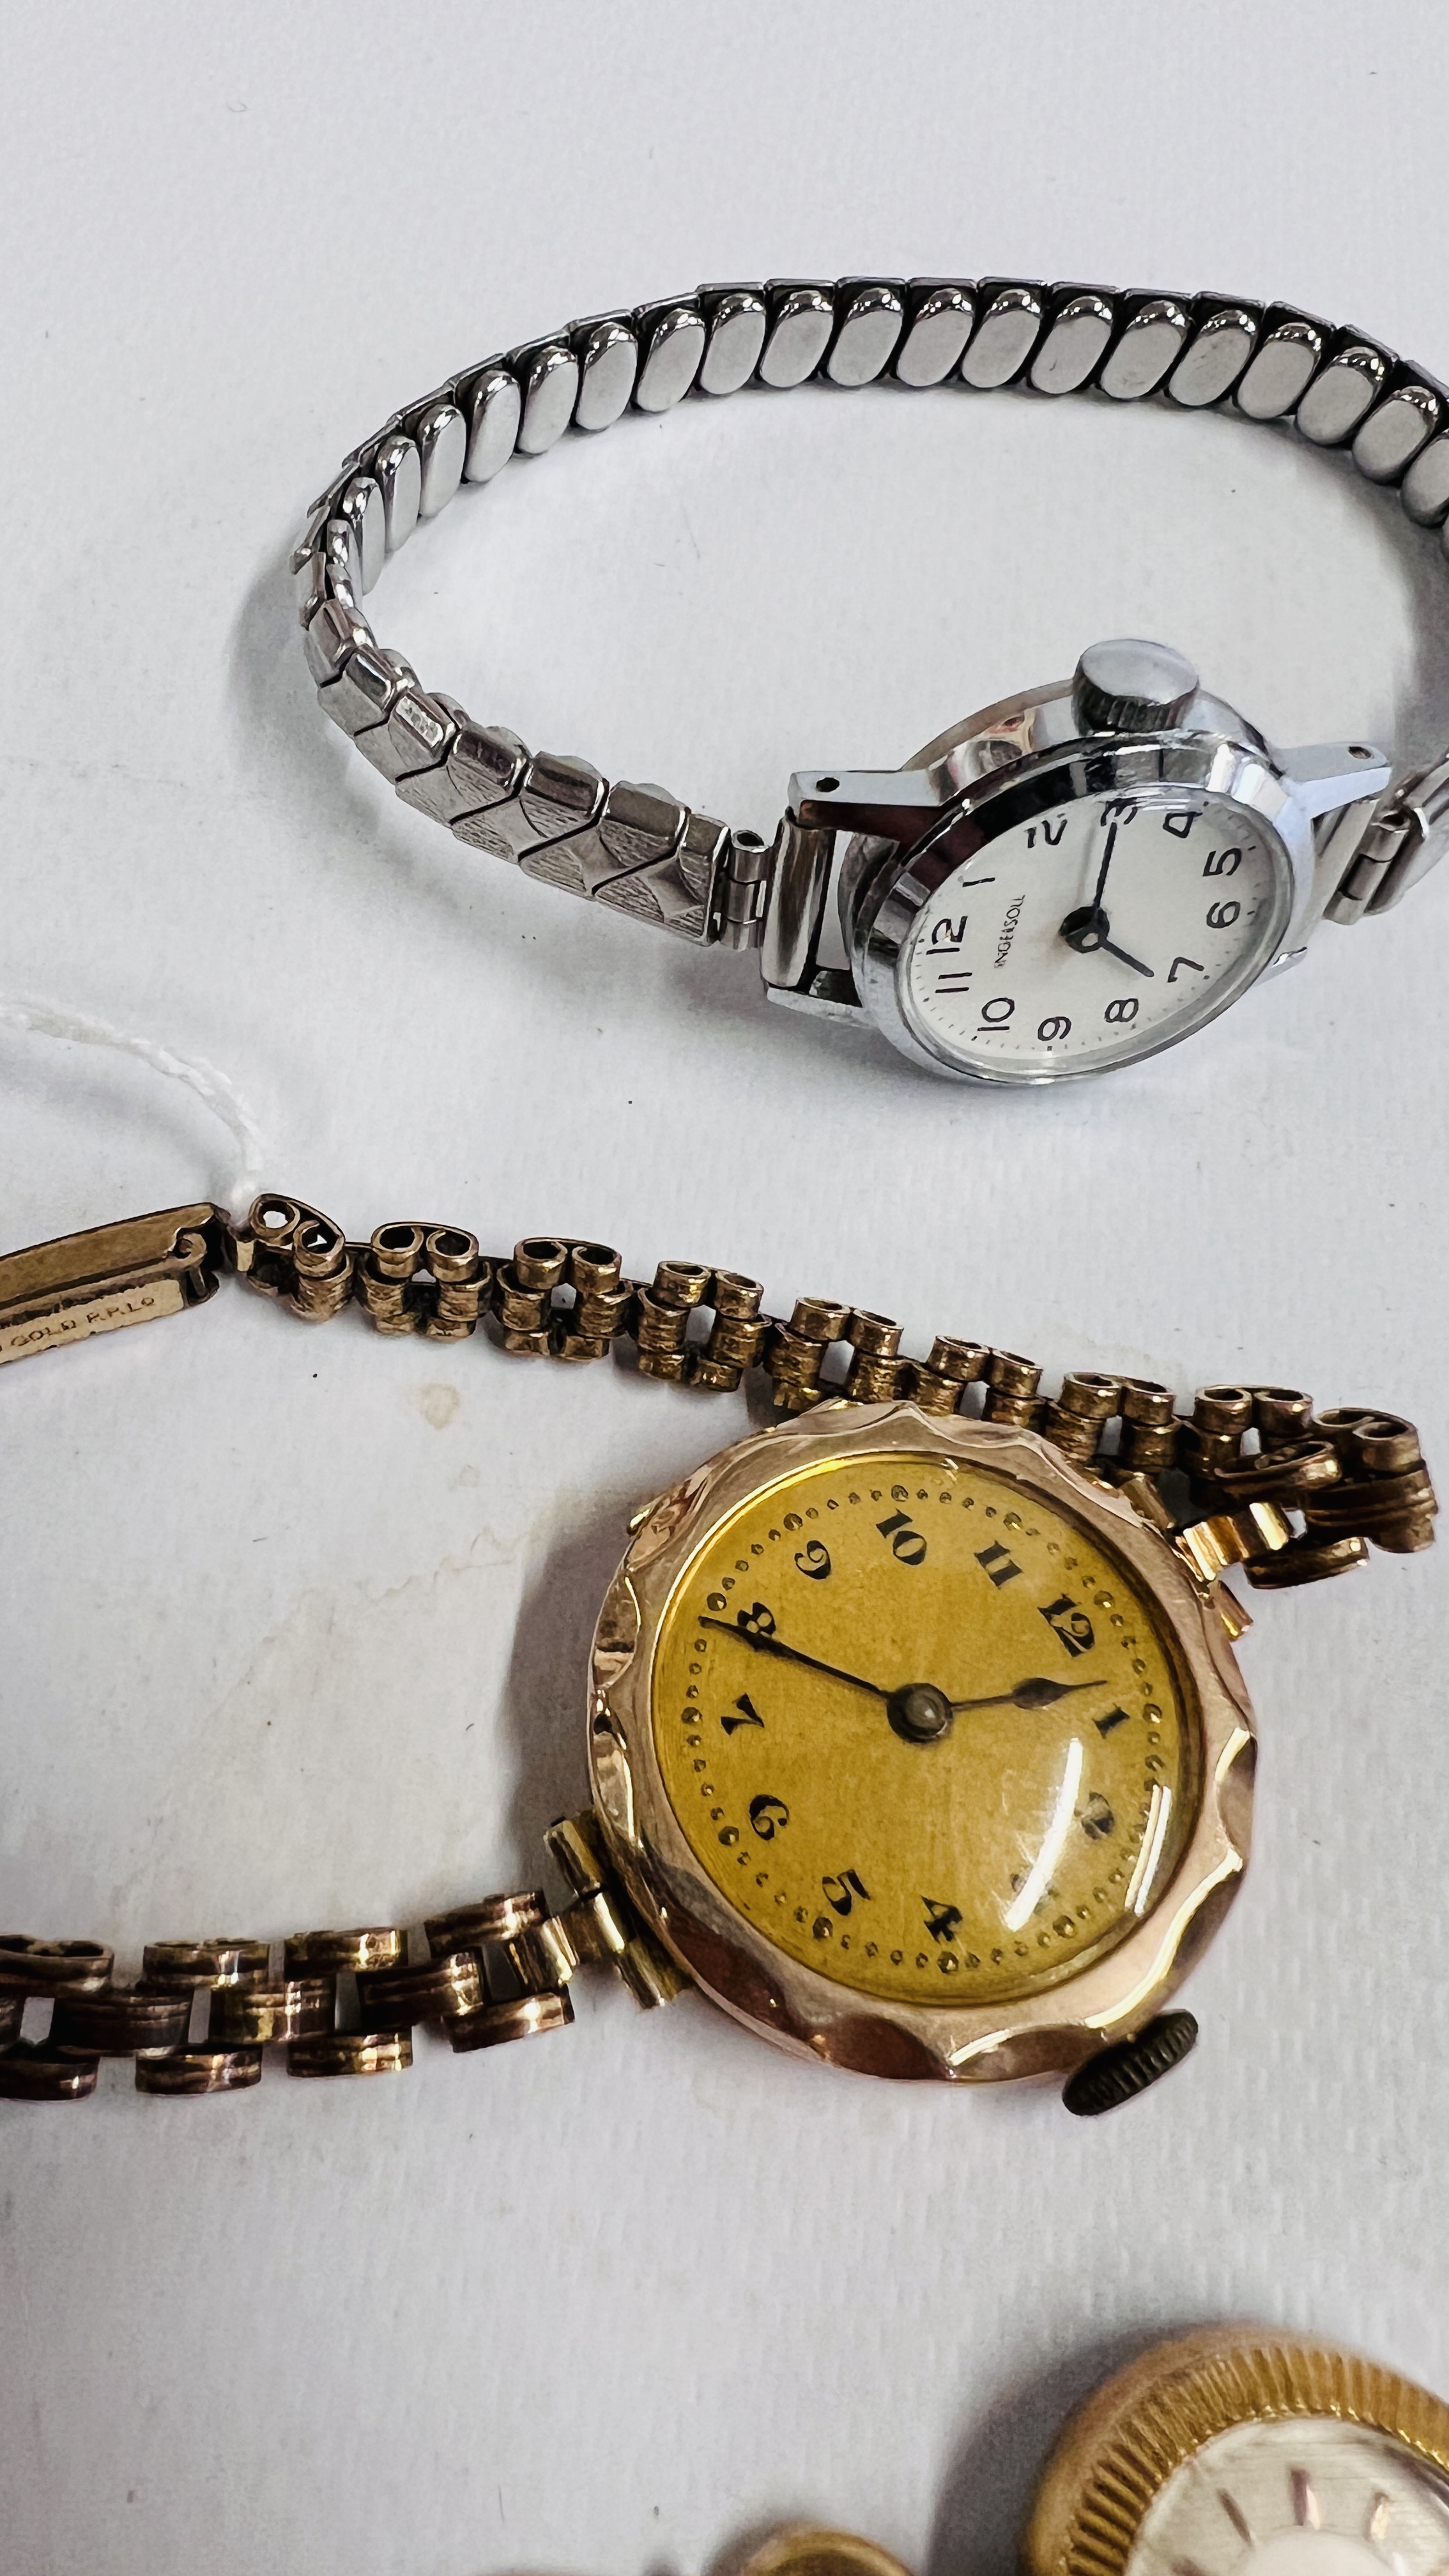 A PLATED CHAIN SUPPORTING A PLATED WATCH, A LADIES HELVETIA WRIST WATCH STEEL AND GOLD PLATED, - Image 2 of 5